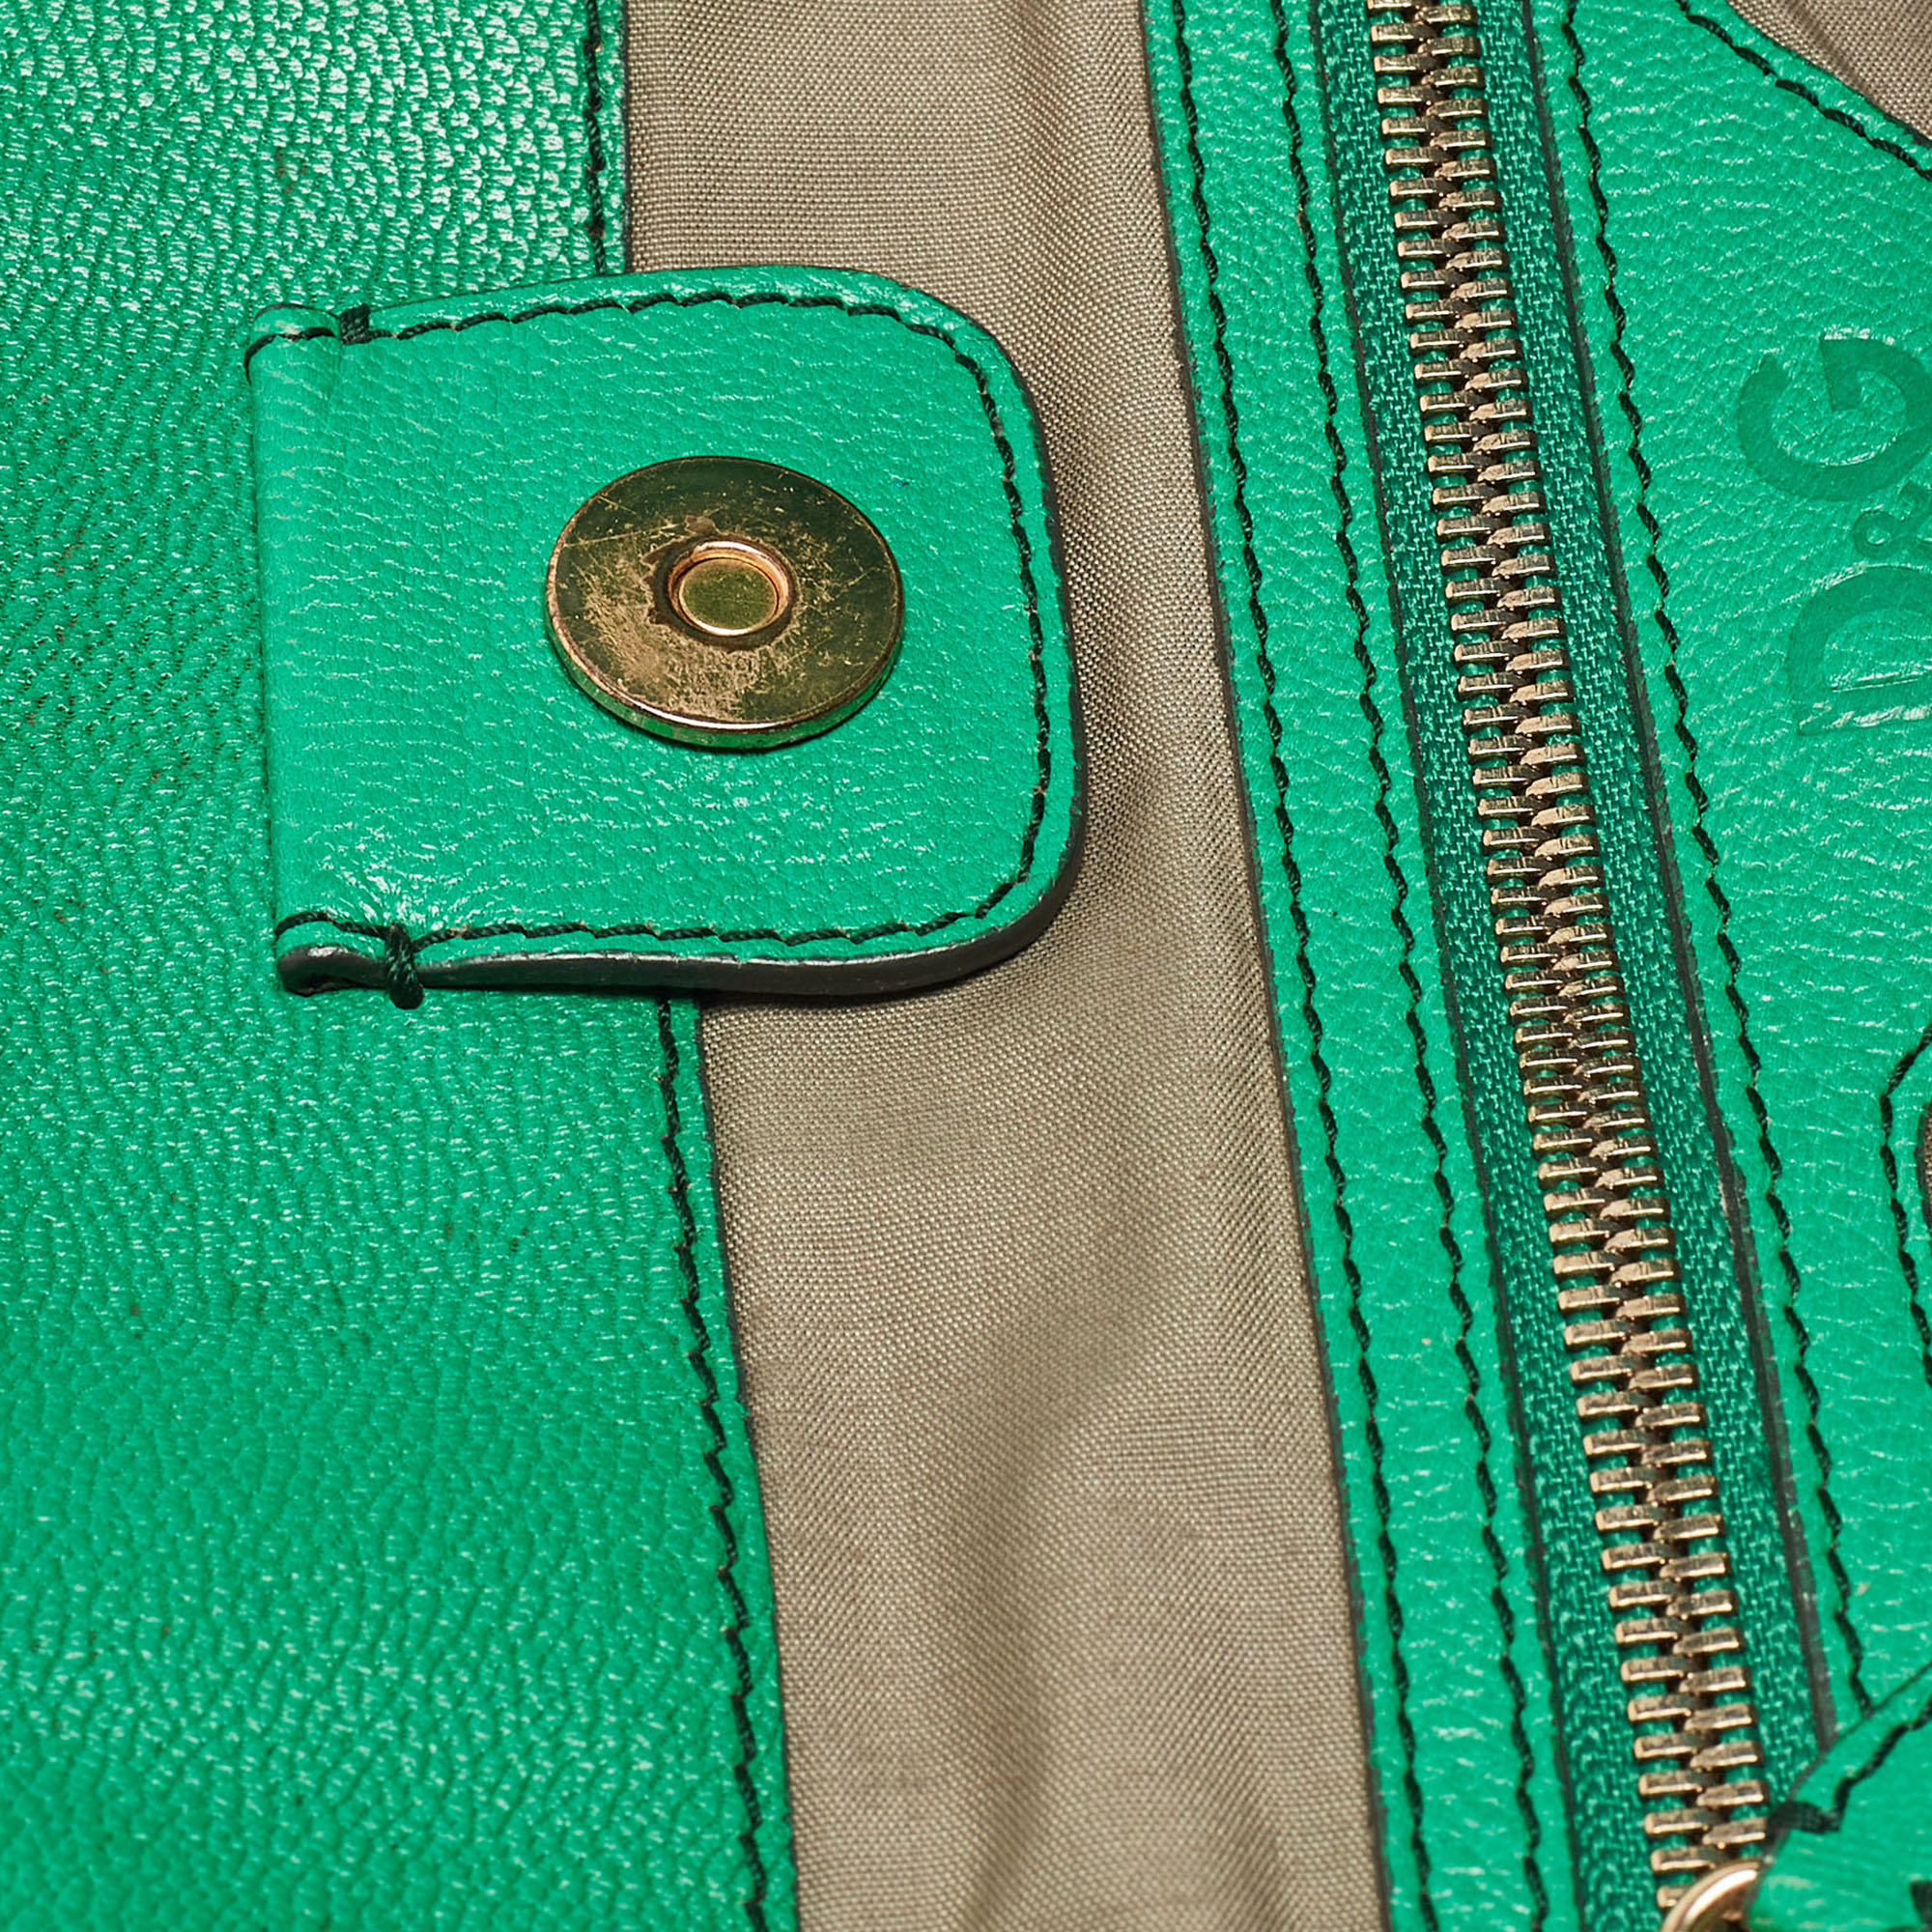 D&G Green Leather Ania Tote